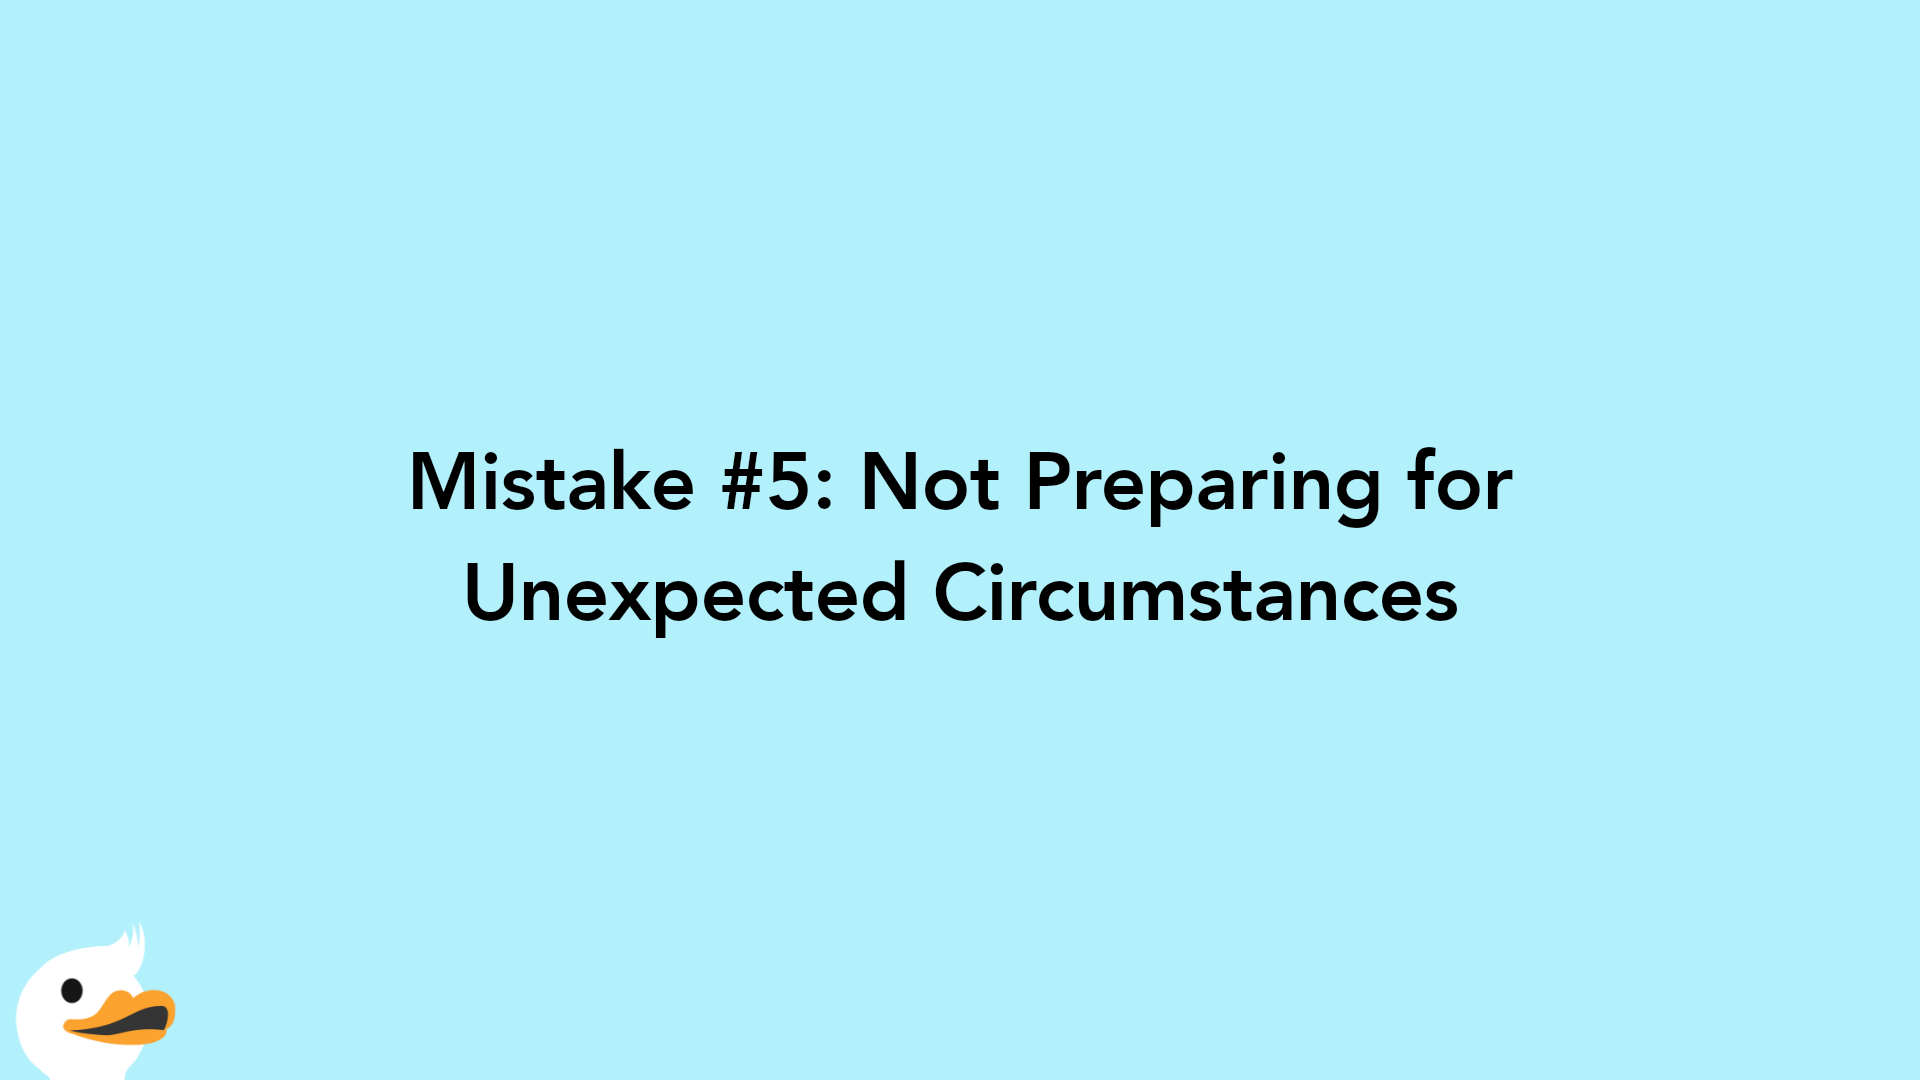 Mistake #5: Not Preparing for Unexpected Circumstances